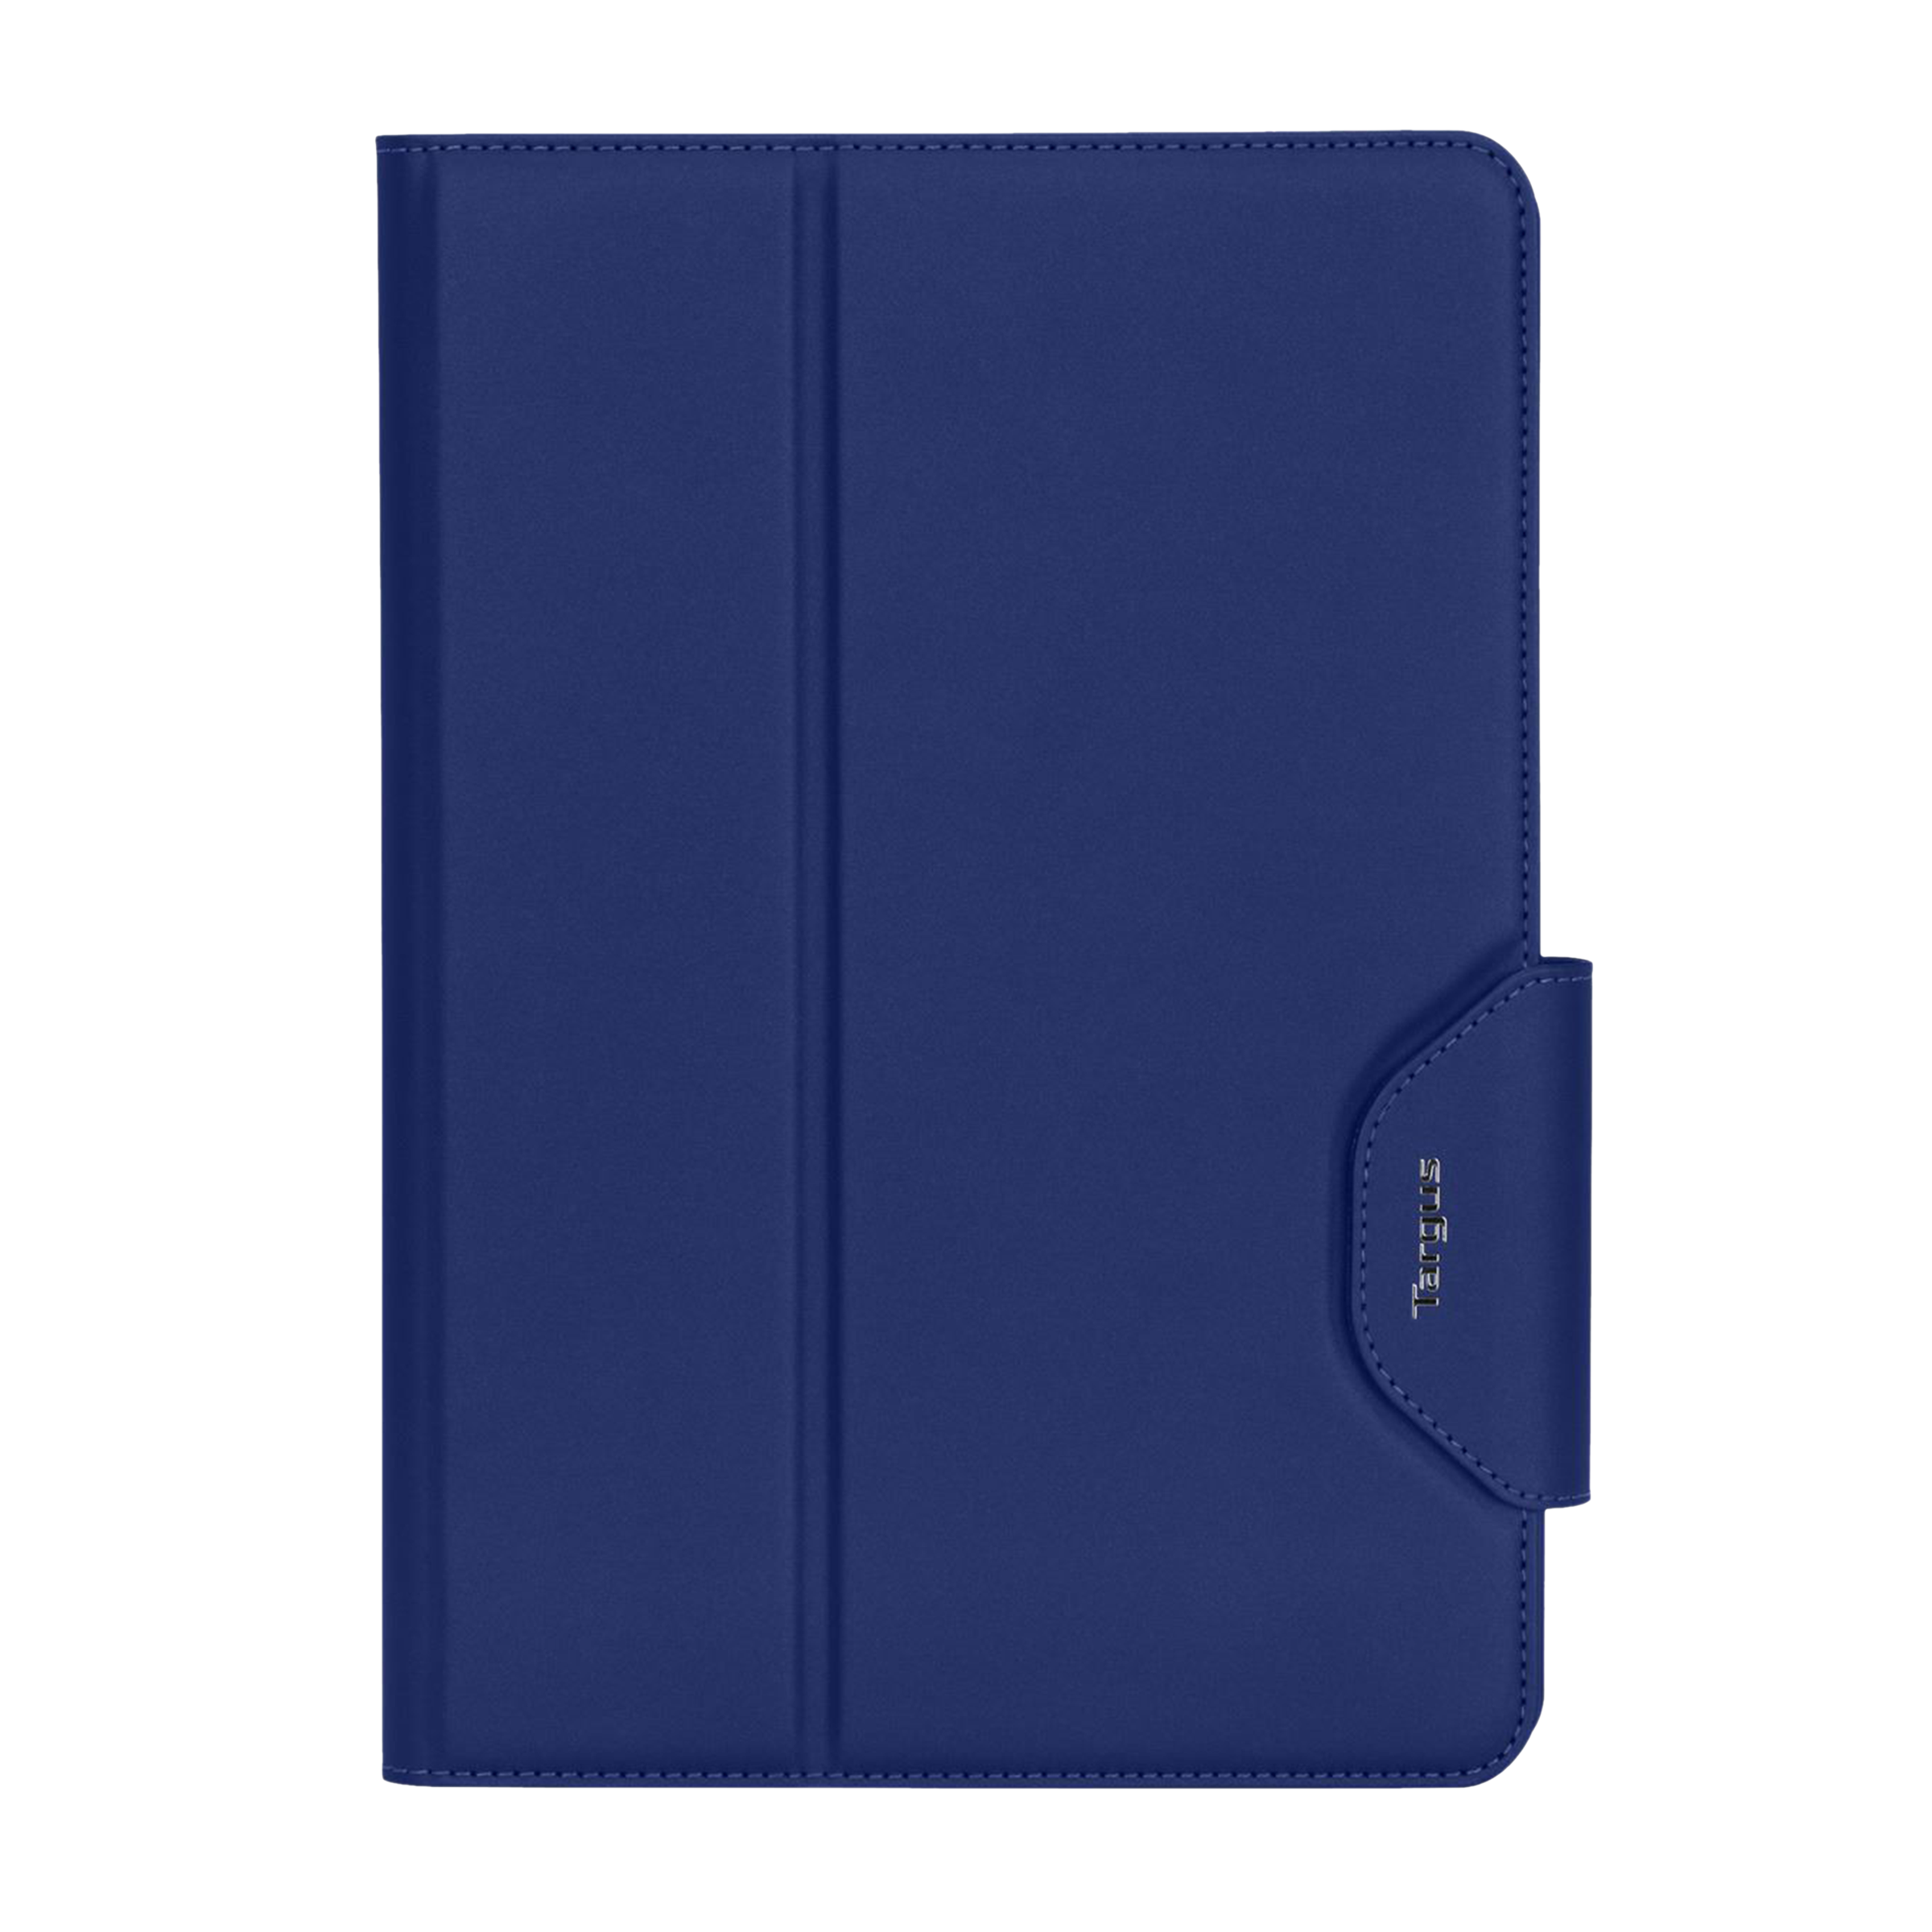 Targus VersaVu Polyurethane, Polycarbonate & Thermoplastic Polyester Flip Cover for Apple iPad 10.2 Inch (7th, 8th, 9th Gen), iPad Air 10.5 Inch, iPad Pro 10.5 Inch (Military Grade Drop Protection, Blue)